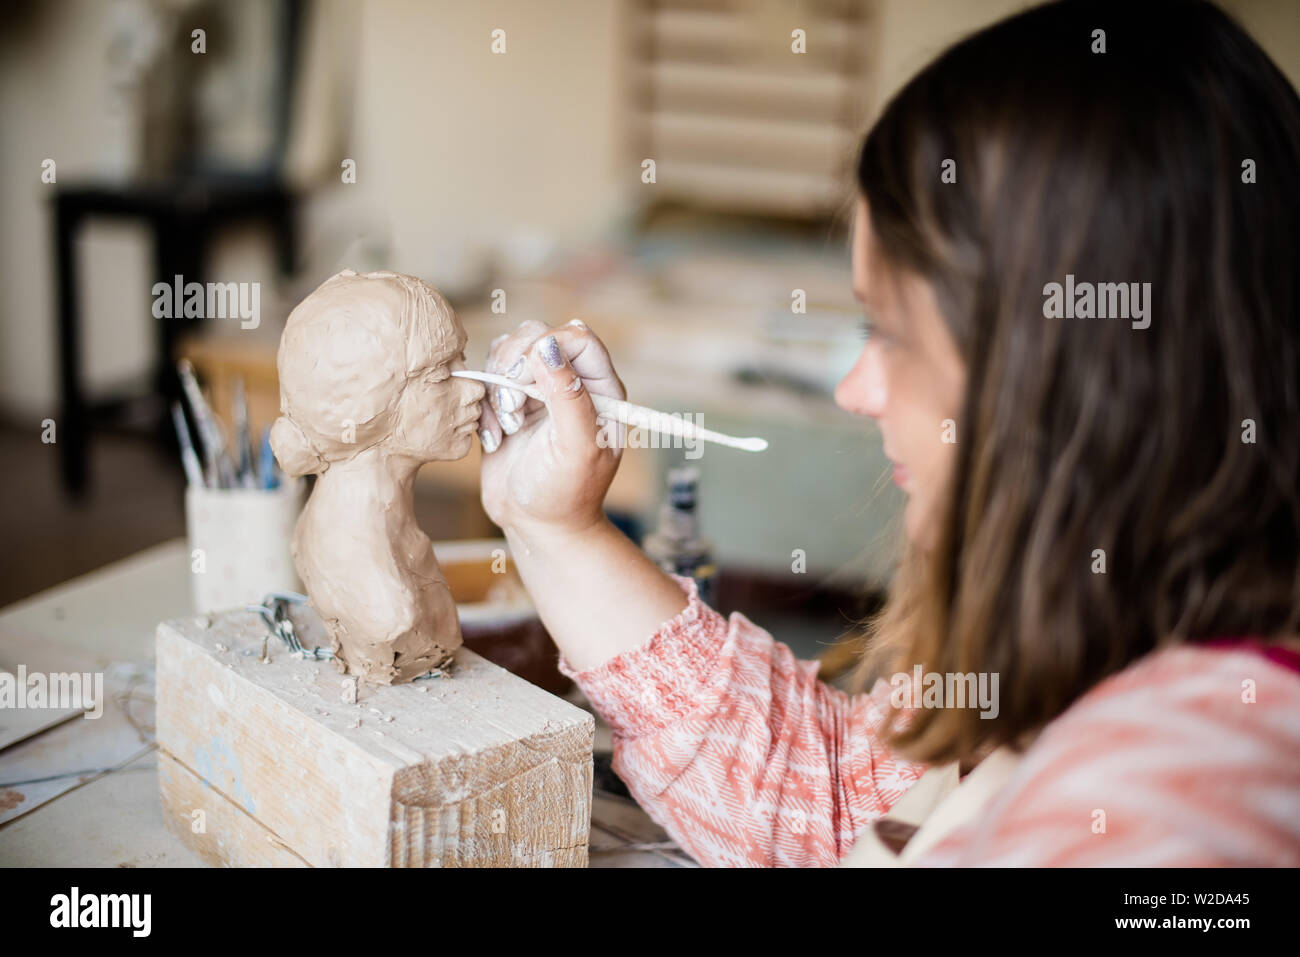 Lady sculptor working in her studio, ceramis artist's hands making objects out of natural clay Stock Photo